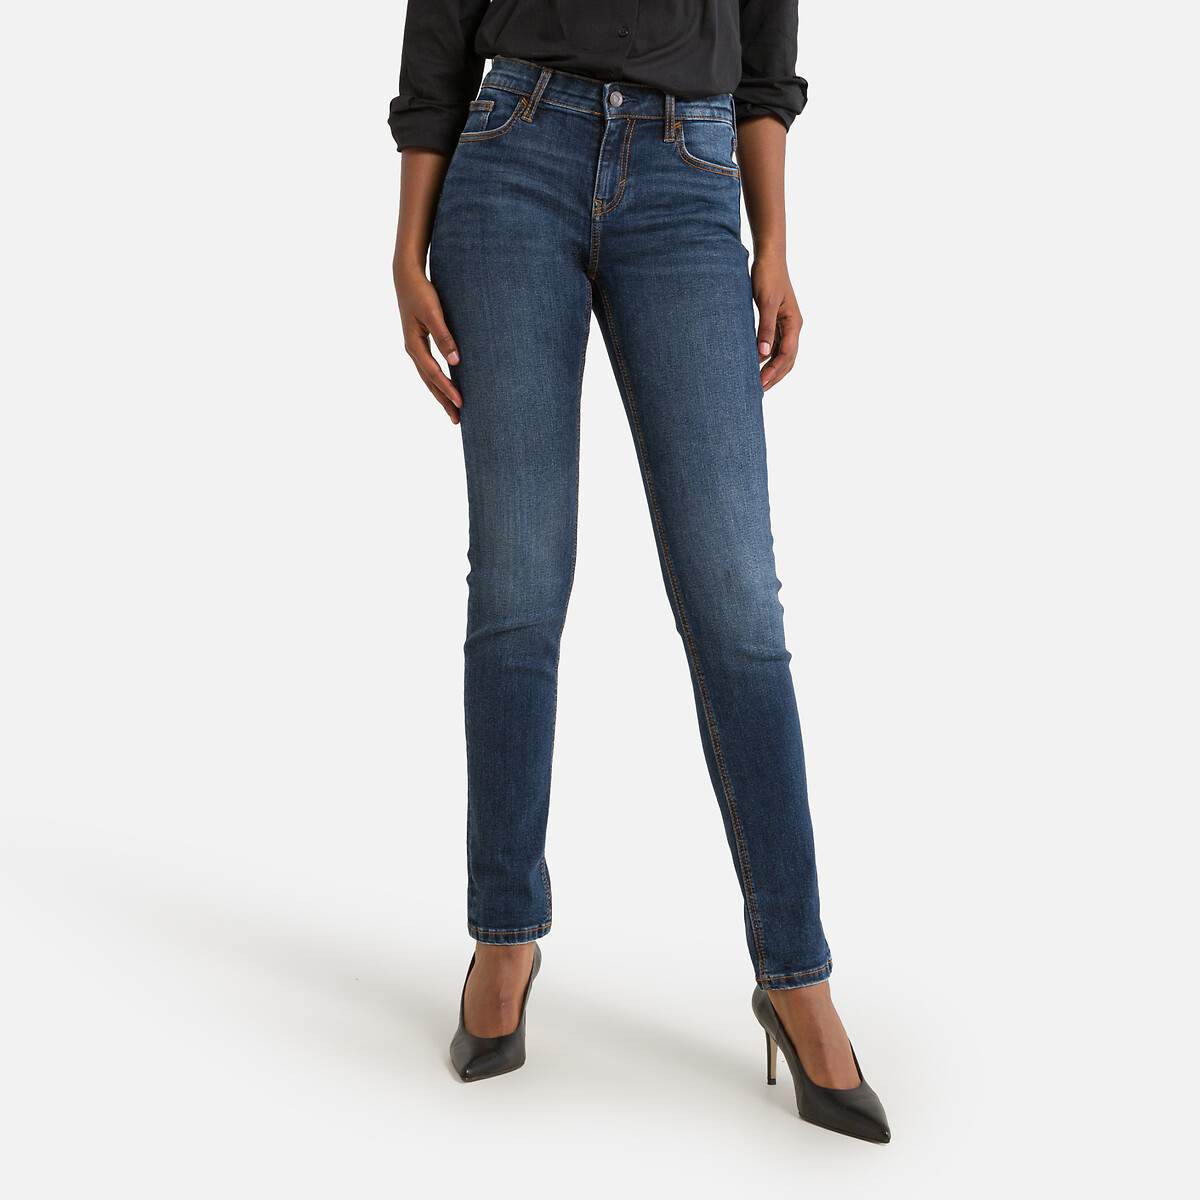 Image of Mid Rise Jeans in Slim Fit